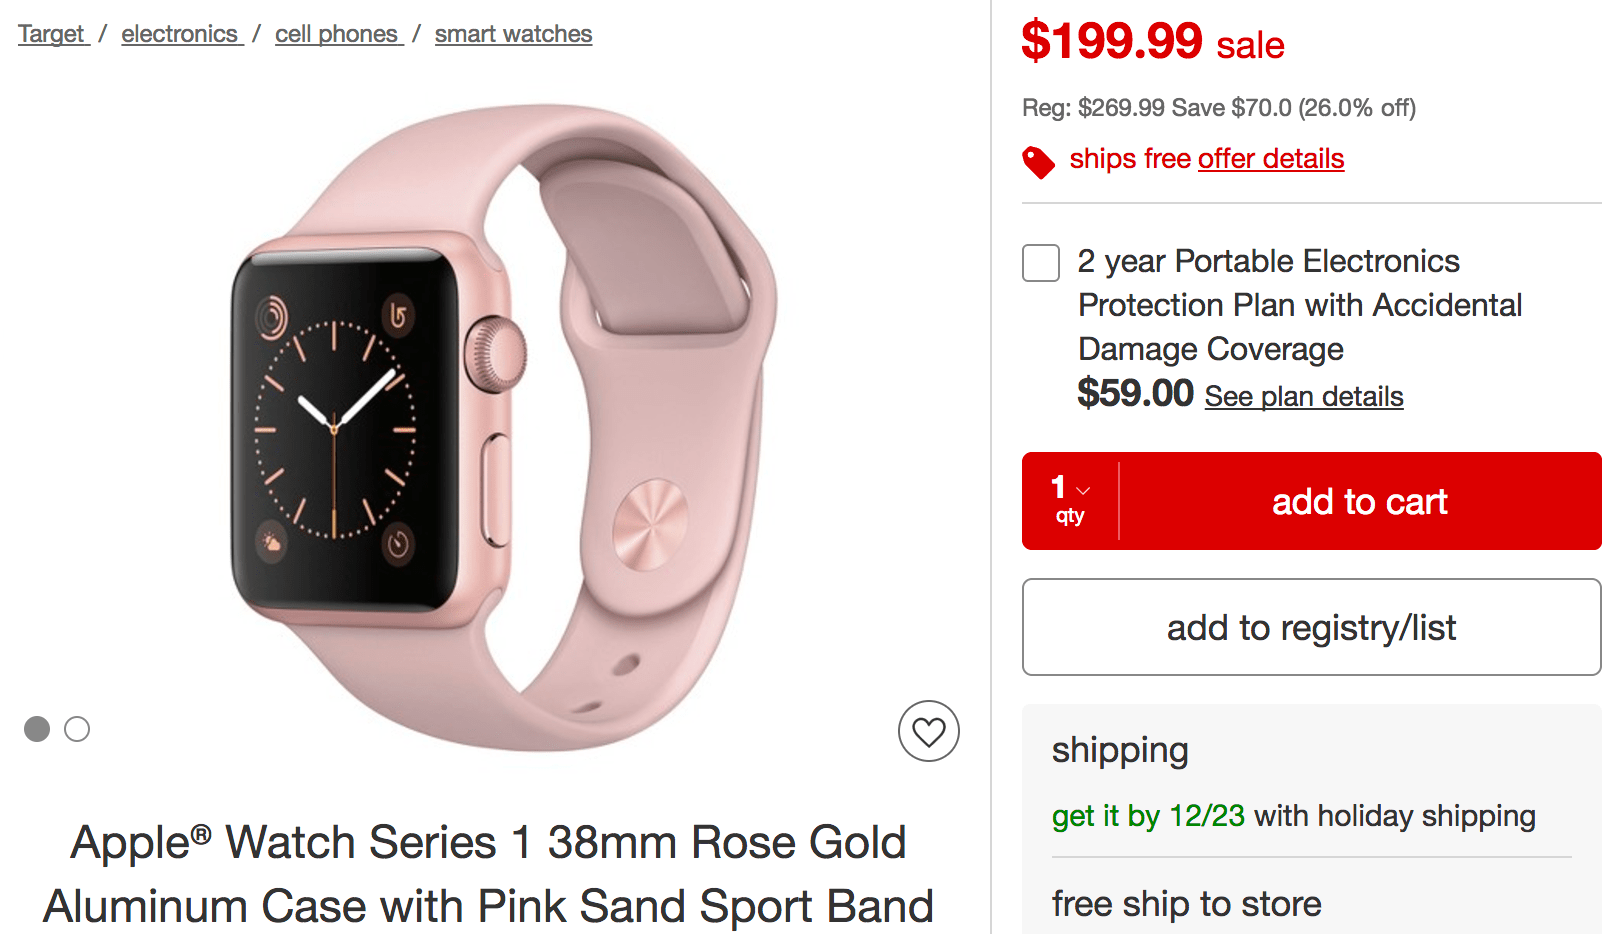 Target offers Apple Watch Series 1 at Black Friday pricing just in time